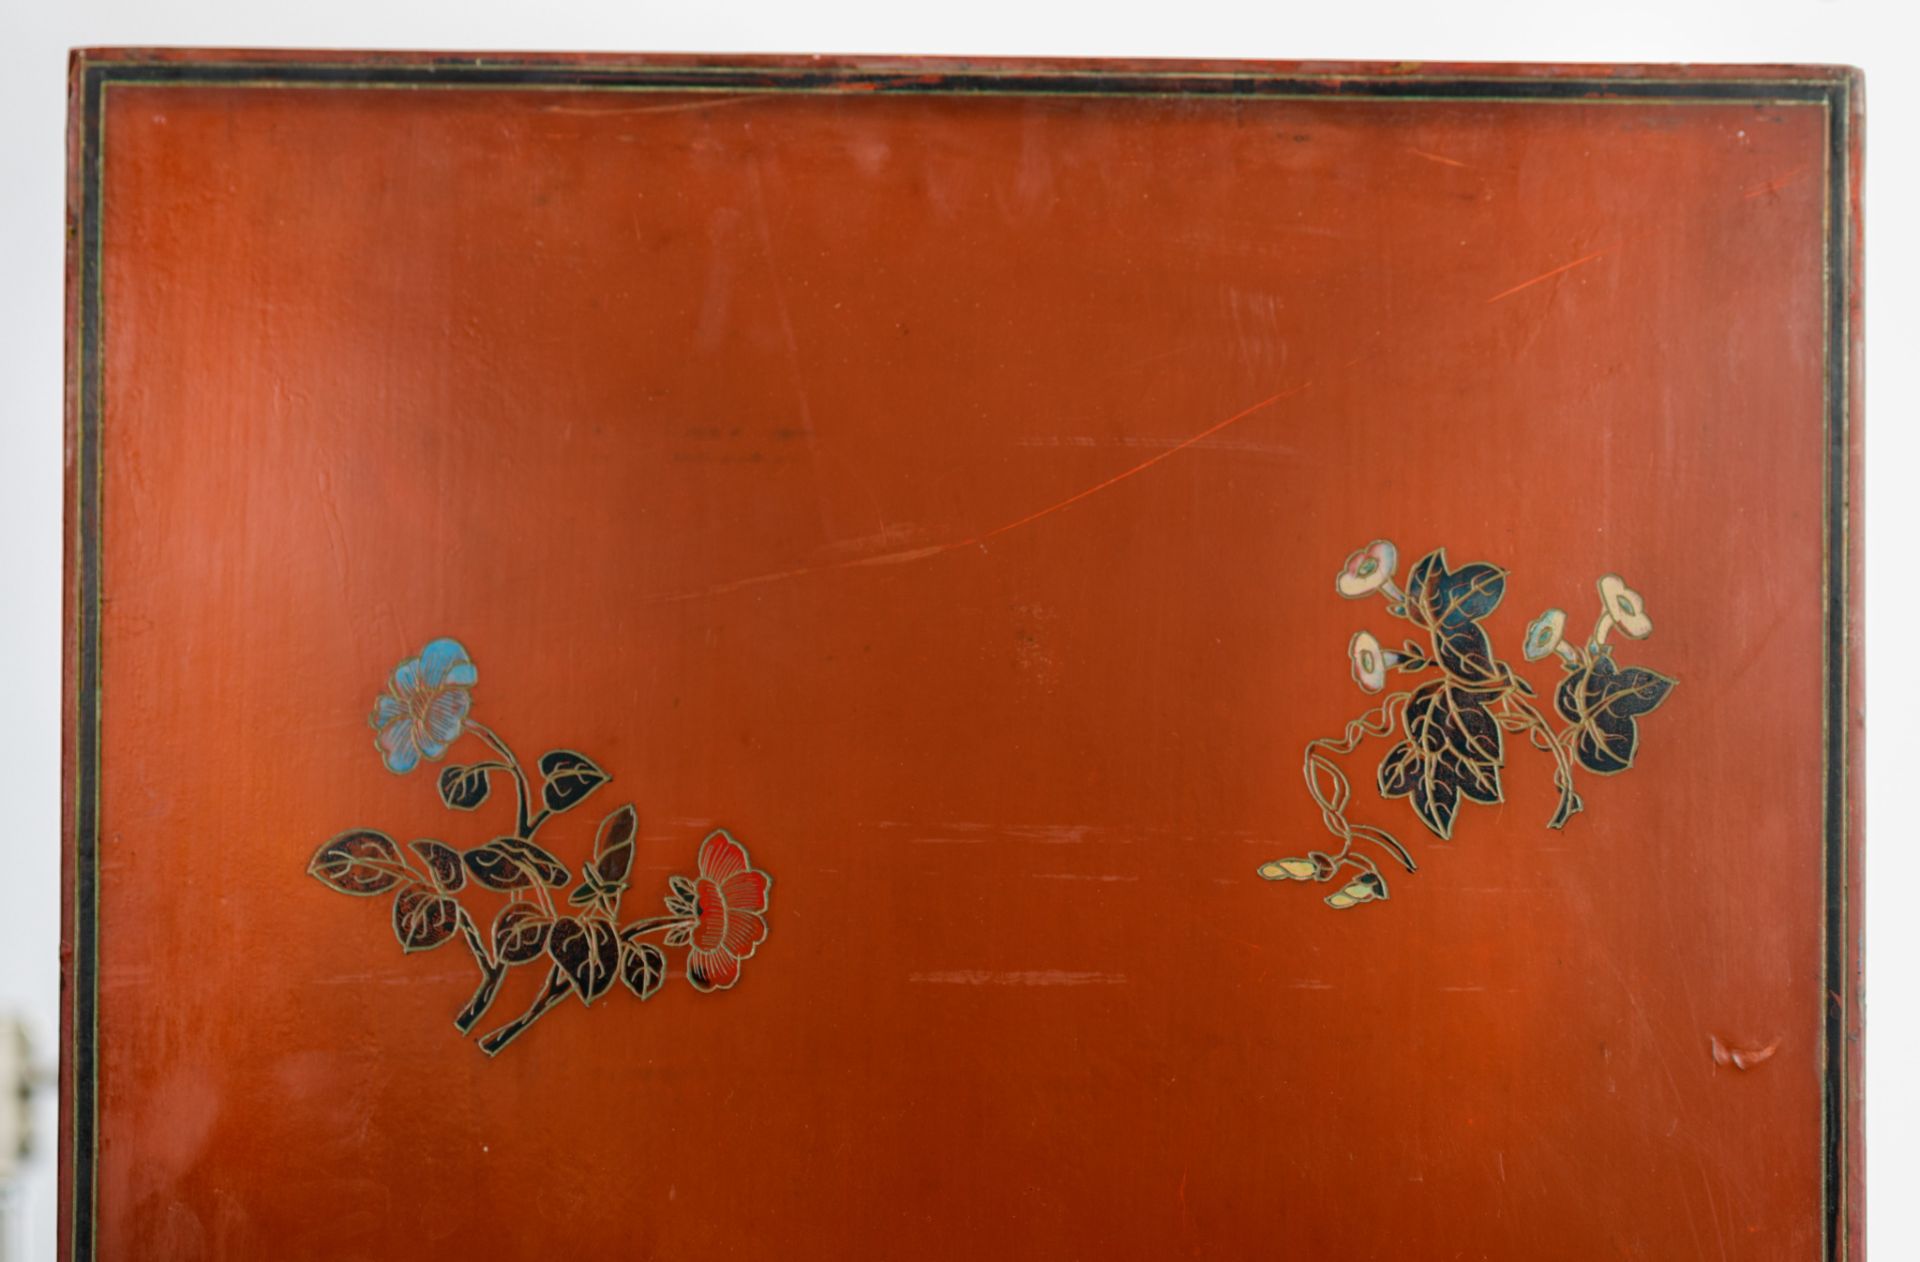 A Chinese six-fold lacquered chamber screen, late 19thC/20thC, Dimensions of one panel 183,3 x 40,5 - Image 7 of 7